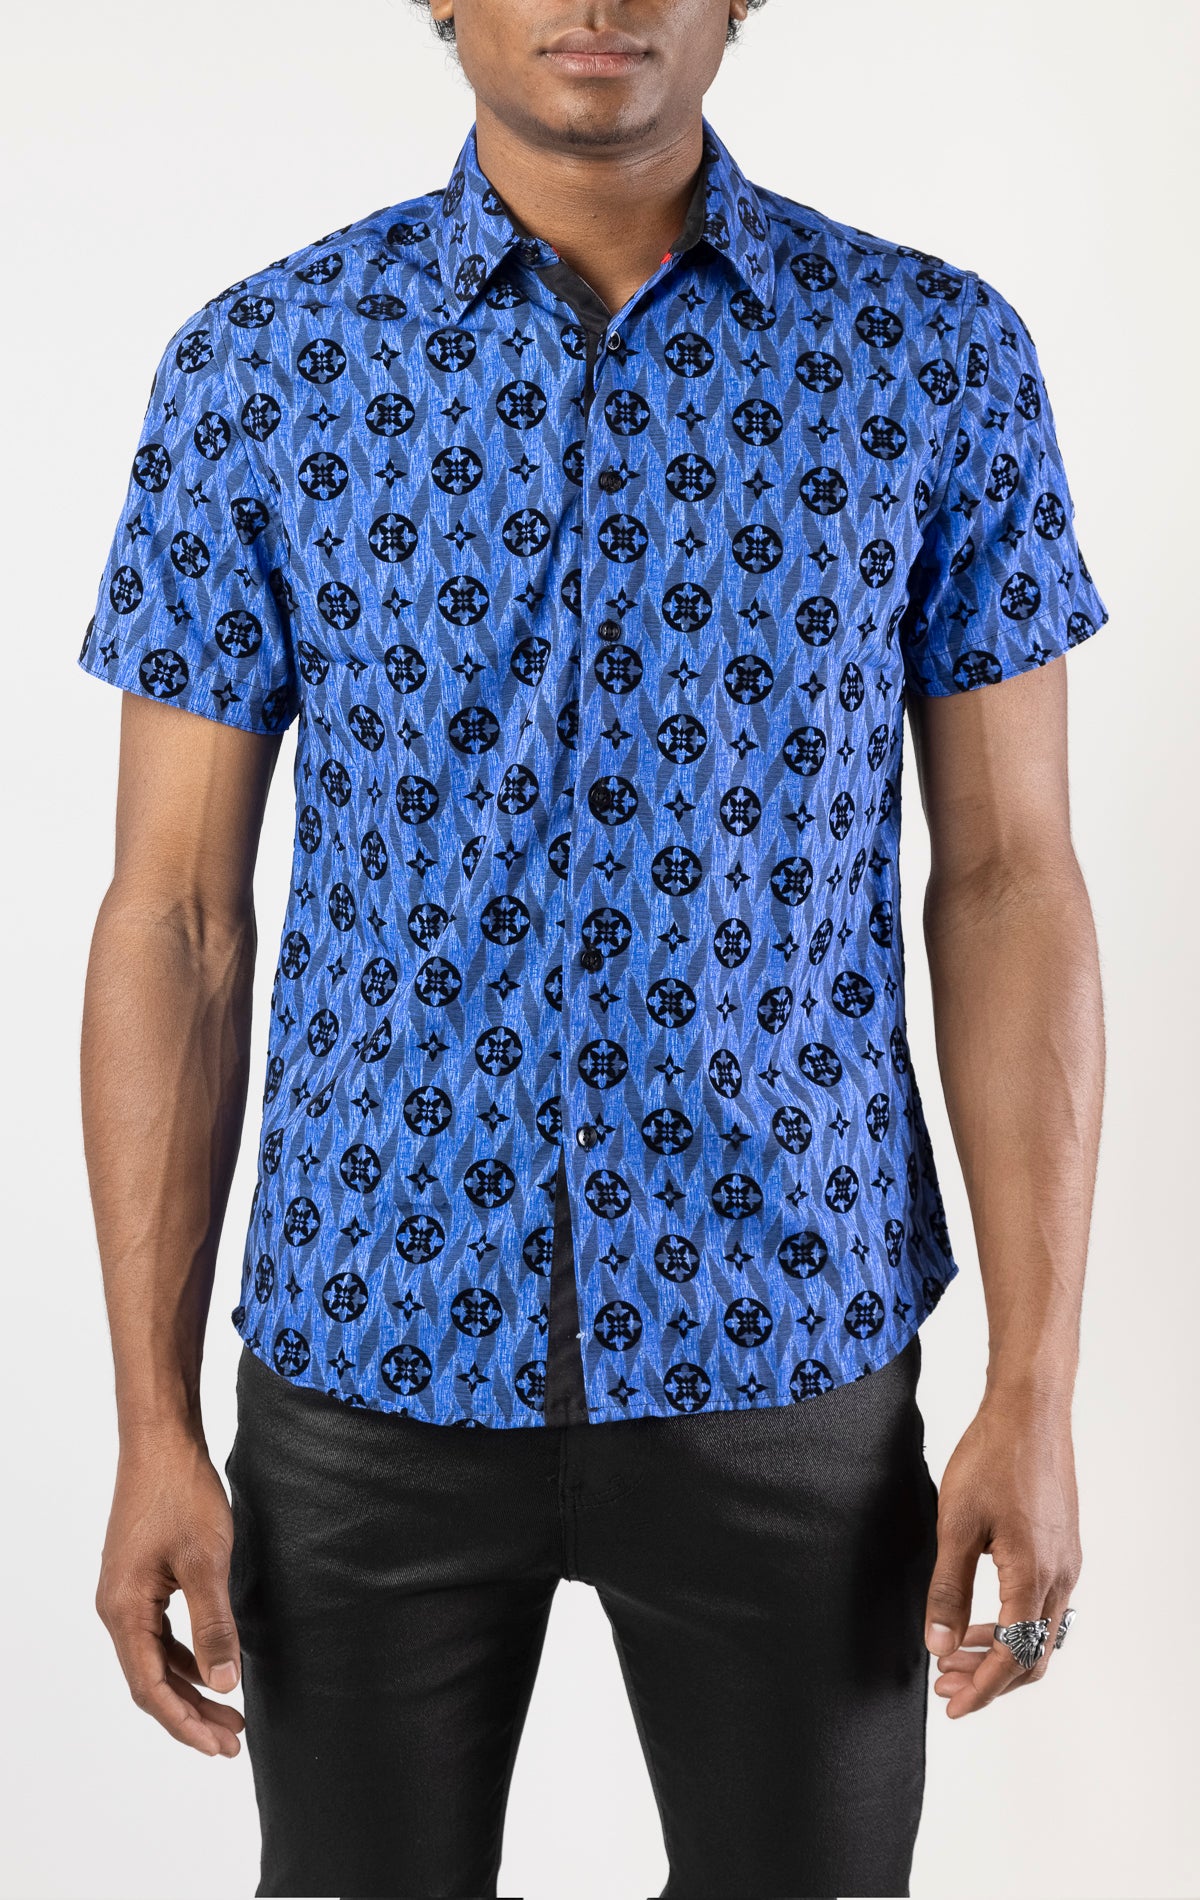 blue Men's casual, relaxed-fit button-down shirt with a short sleeve design. The shirt features an all-over Greek key pattern and a front button closure.